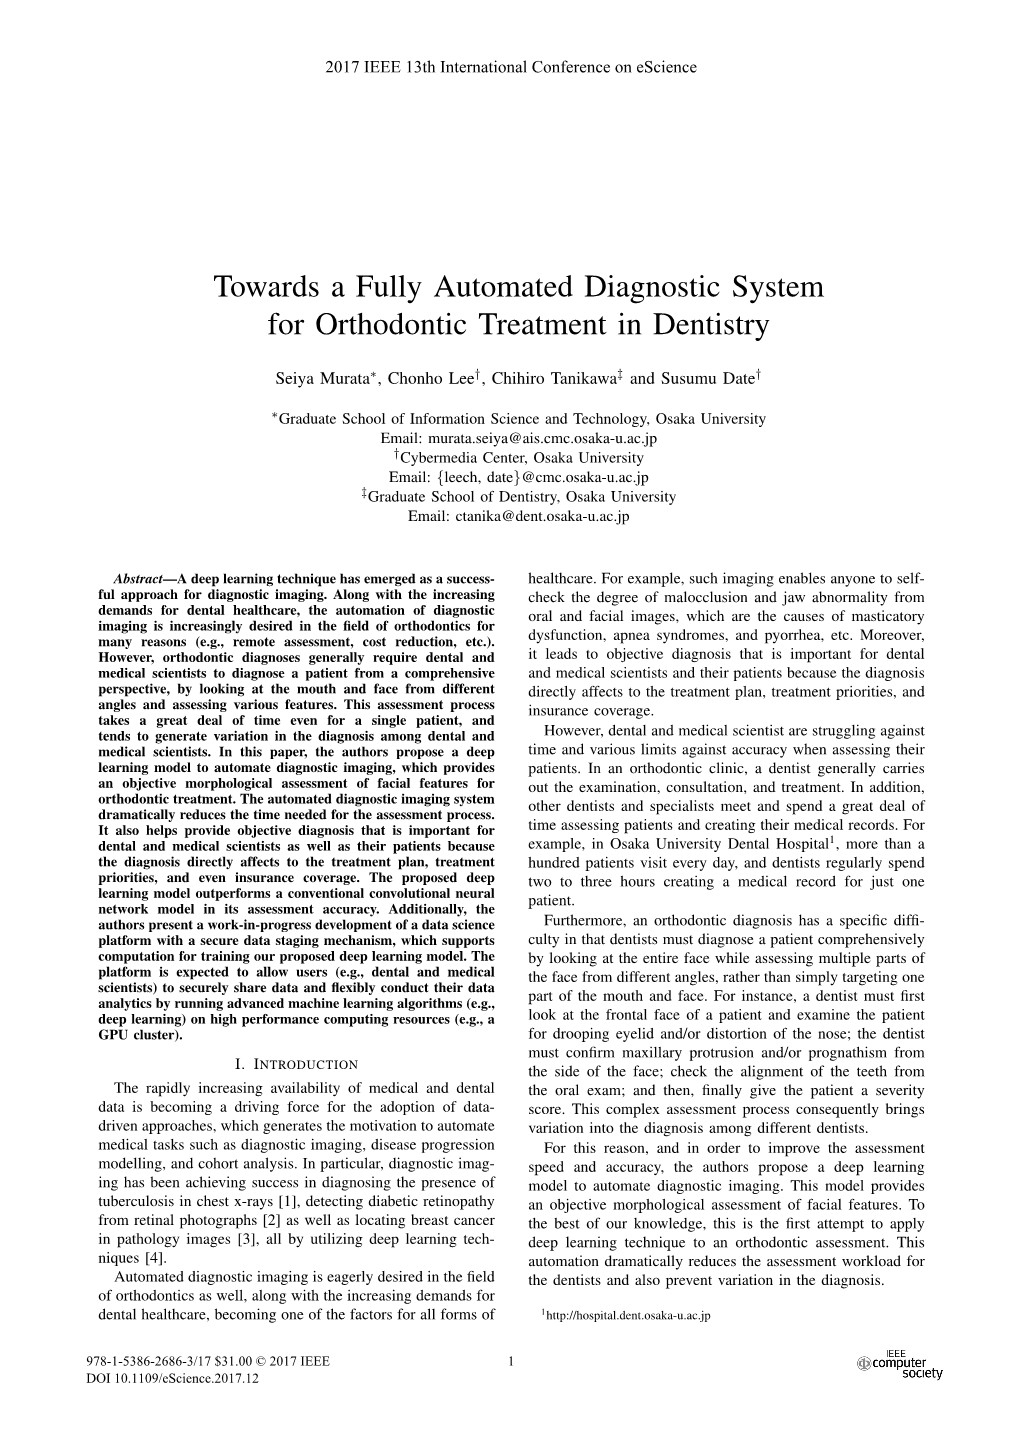 Towards a Fully Automated Diagnostic System for Orthodontic Treatment in Dentistry